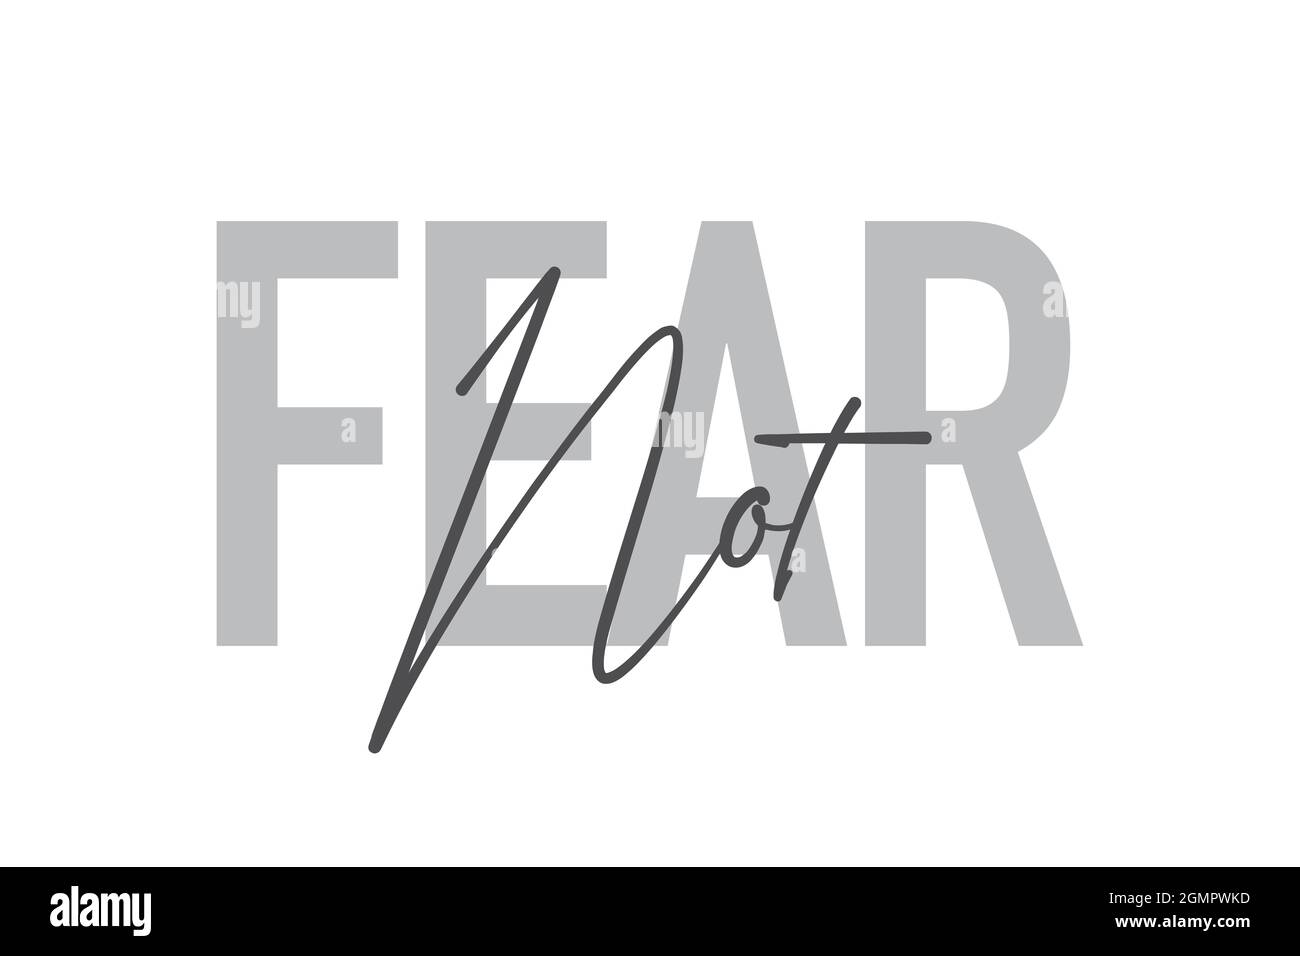 Modern, simple, minimal typographic design of a saying 'Fear Not' in tones of grey color. Cool, urban, trendy and playful graphic vector art with hand Stock Photo